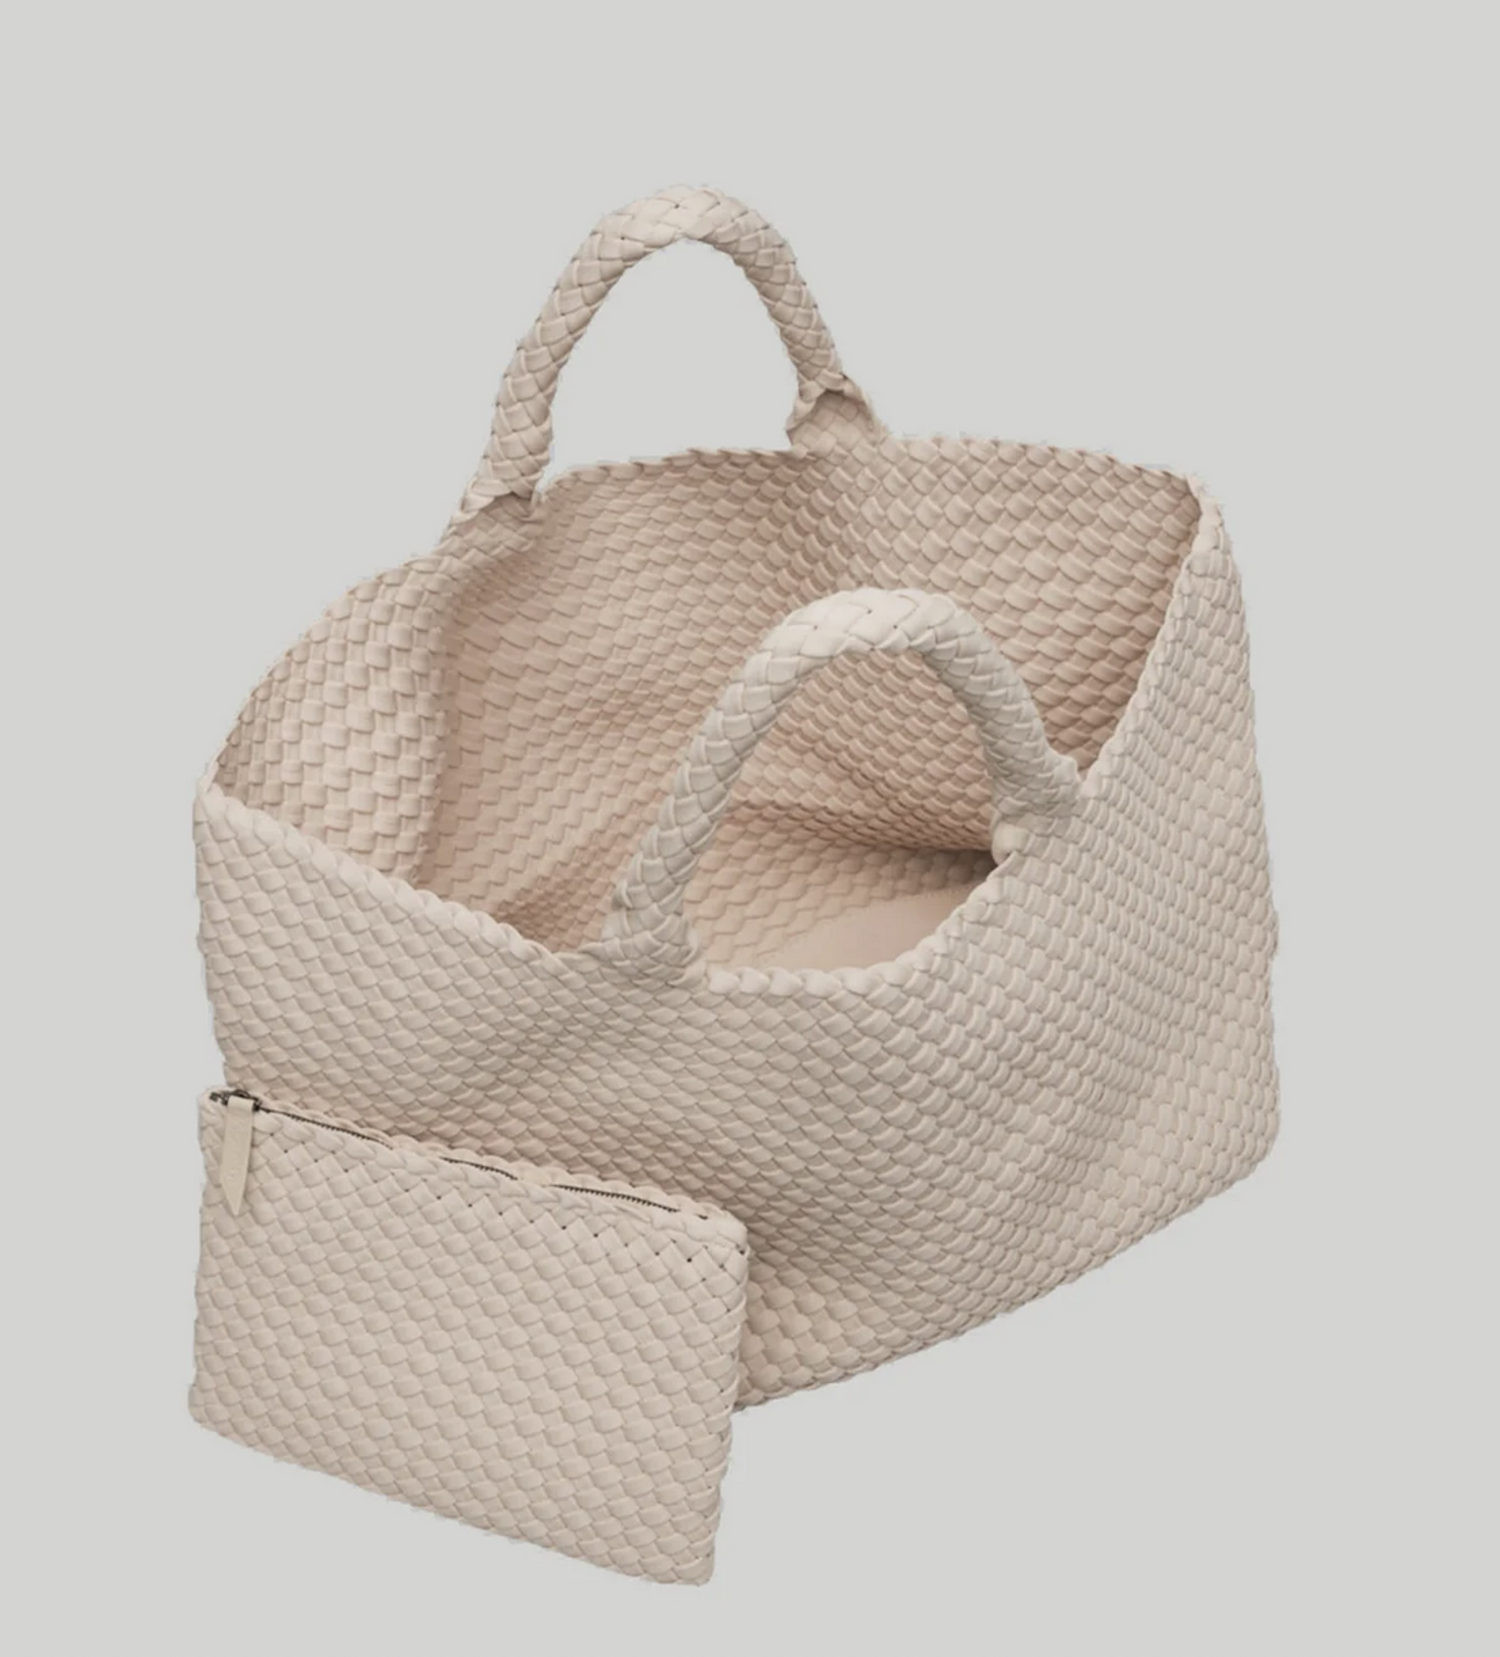 St. Barths Large Tote - The Edit Shops